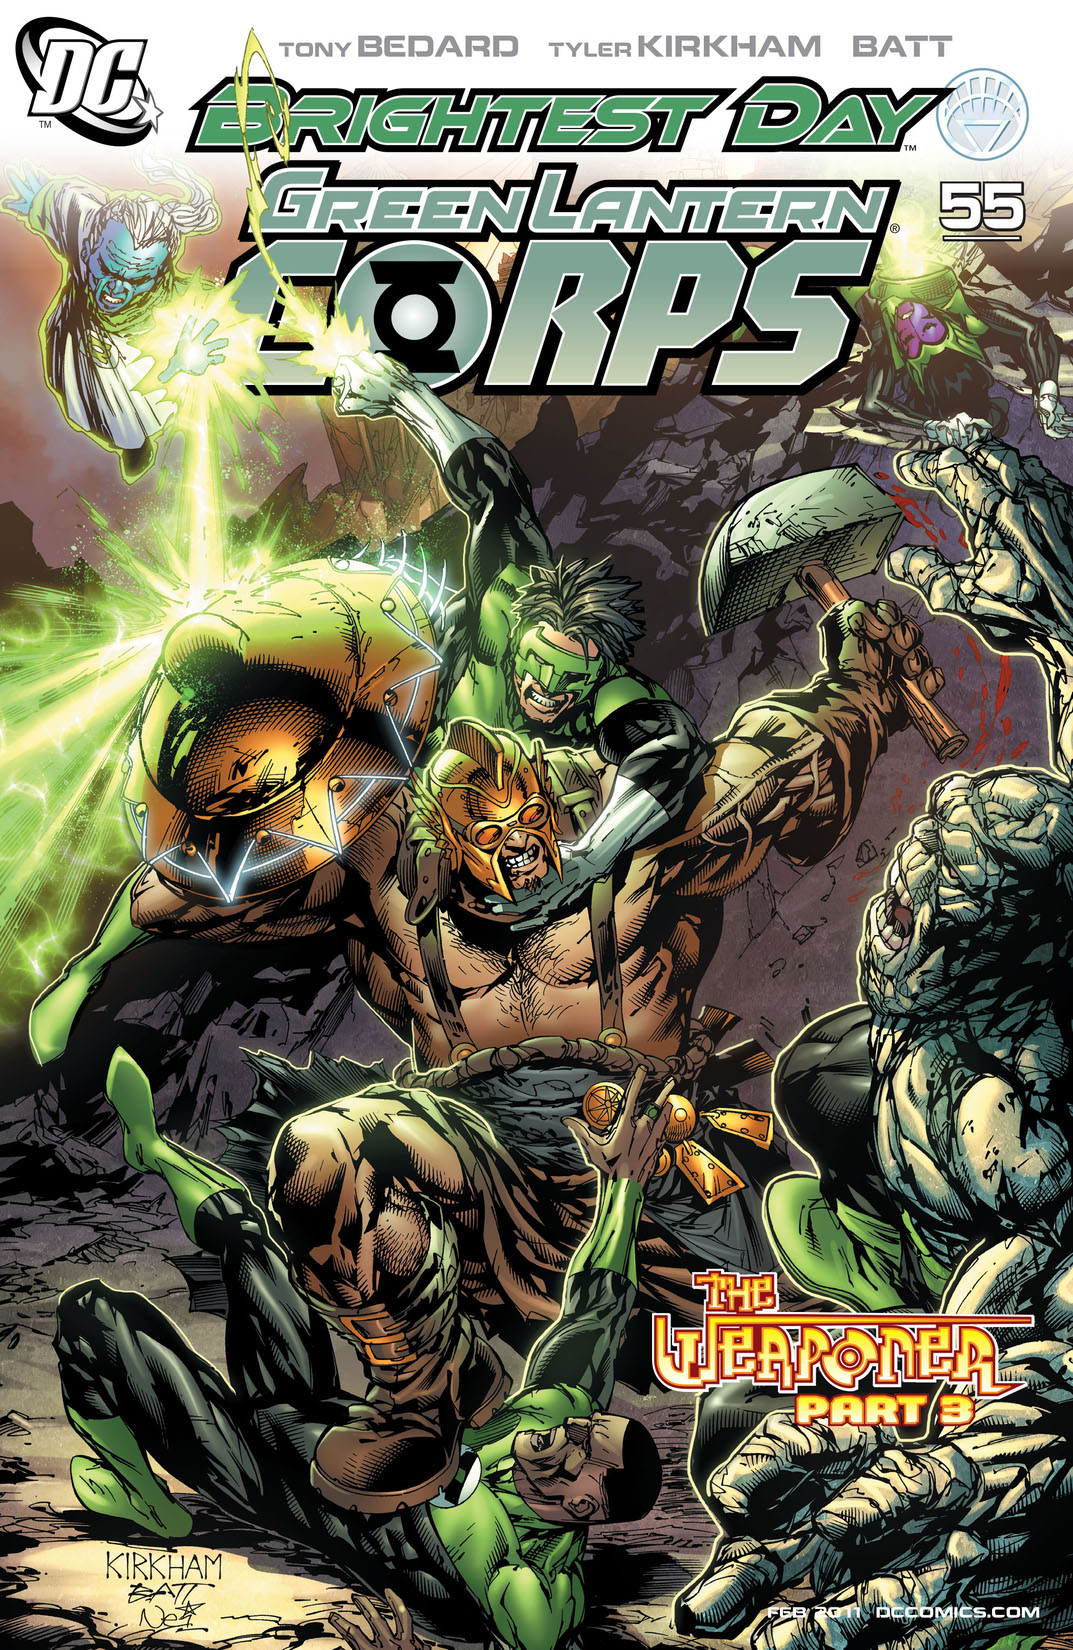 Green Lantern Corps (2006-) #55 preview images